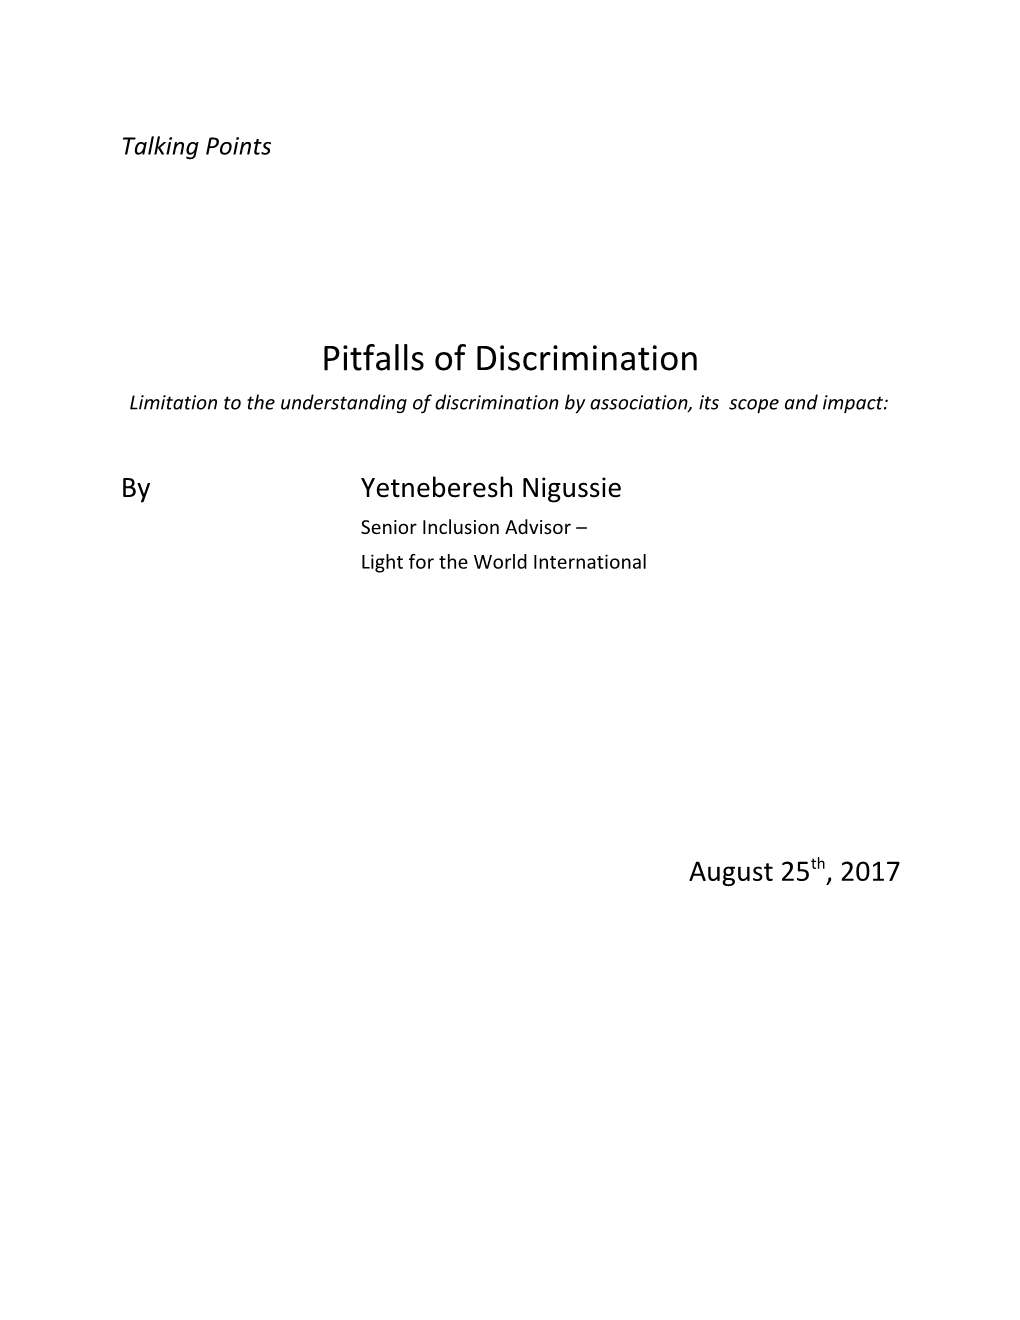 Limitation to the Understanding of Discrimination by Association,Its Scope and Impact